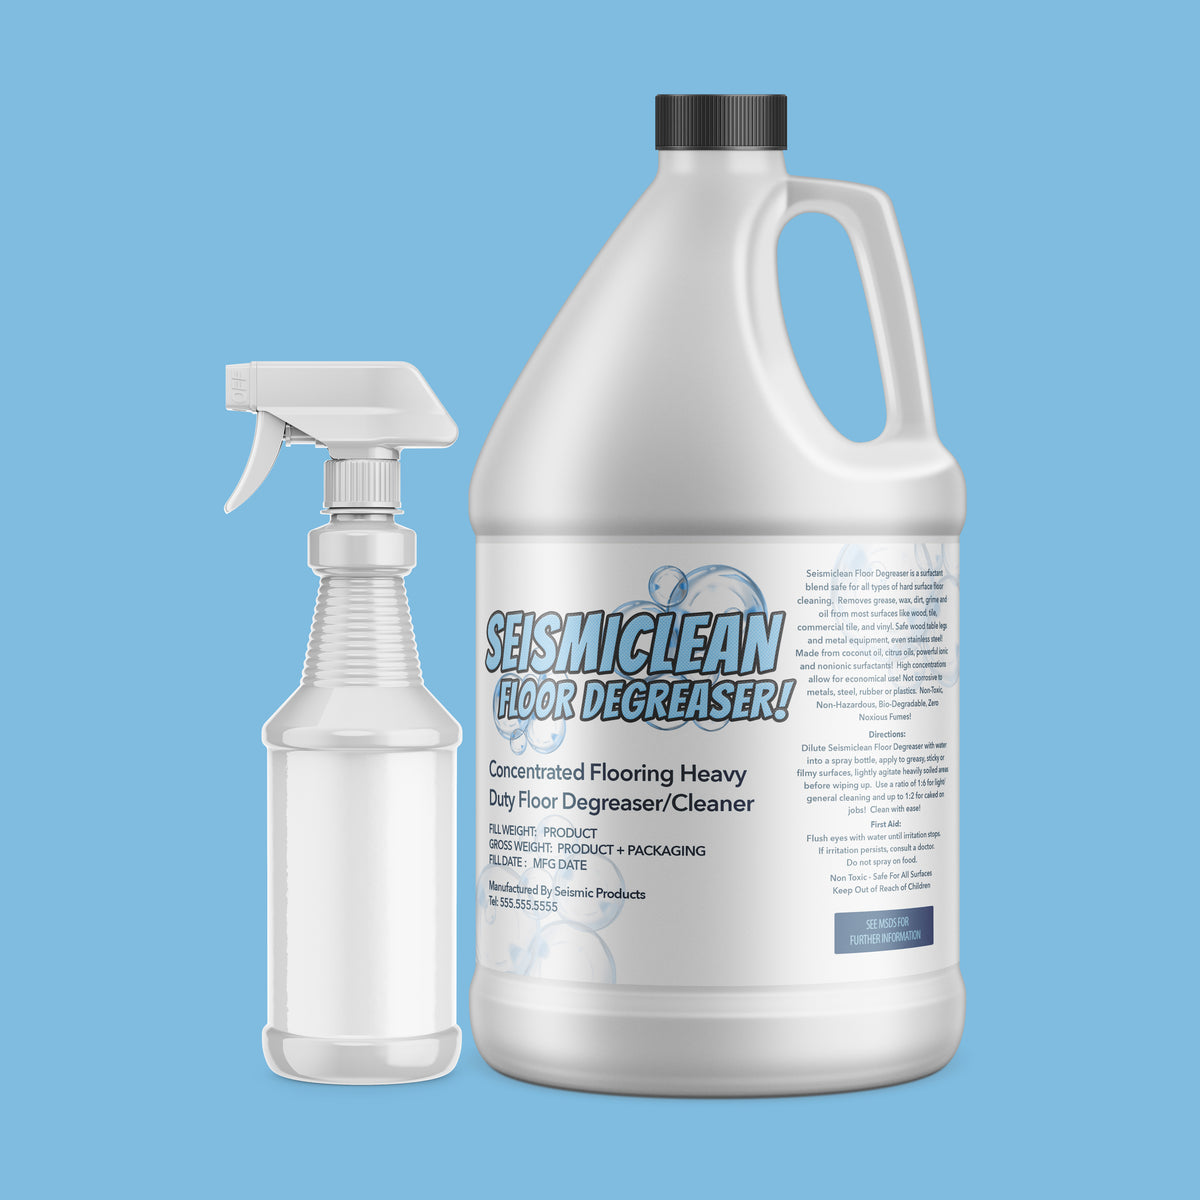 Rubber Floor Cleaner and Degreaser - Cleaner For Rubber